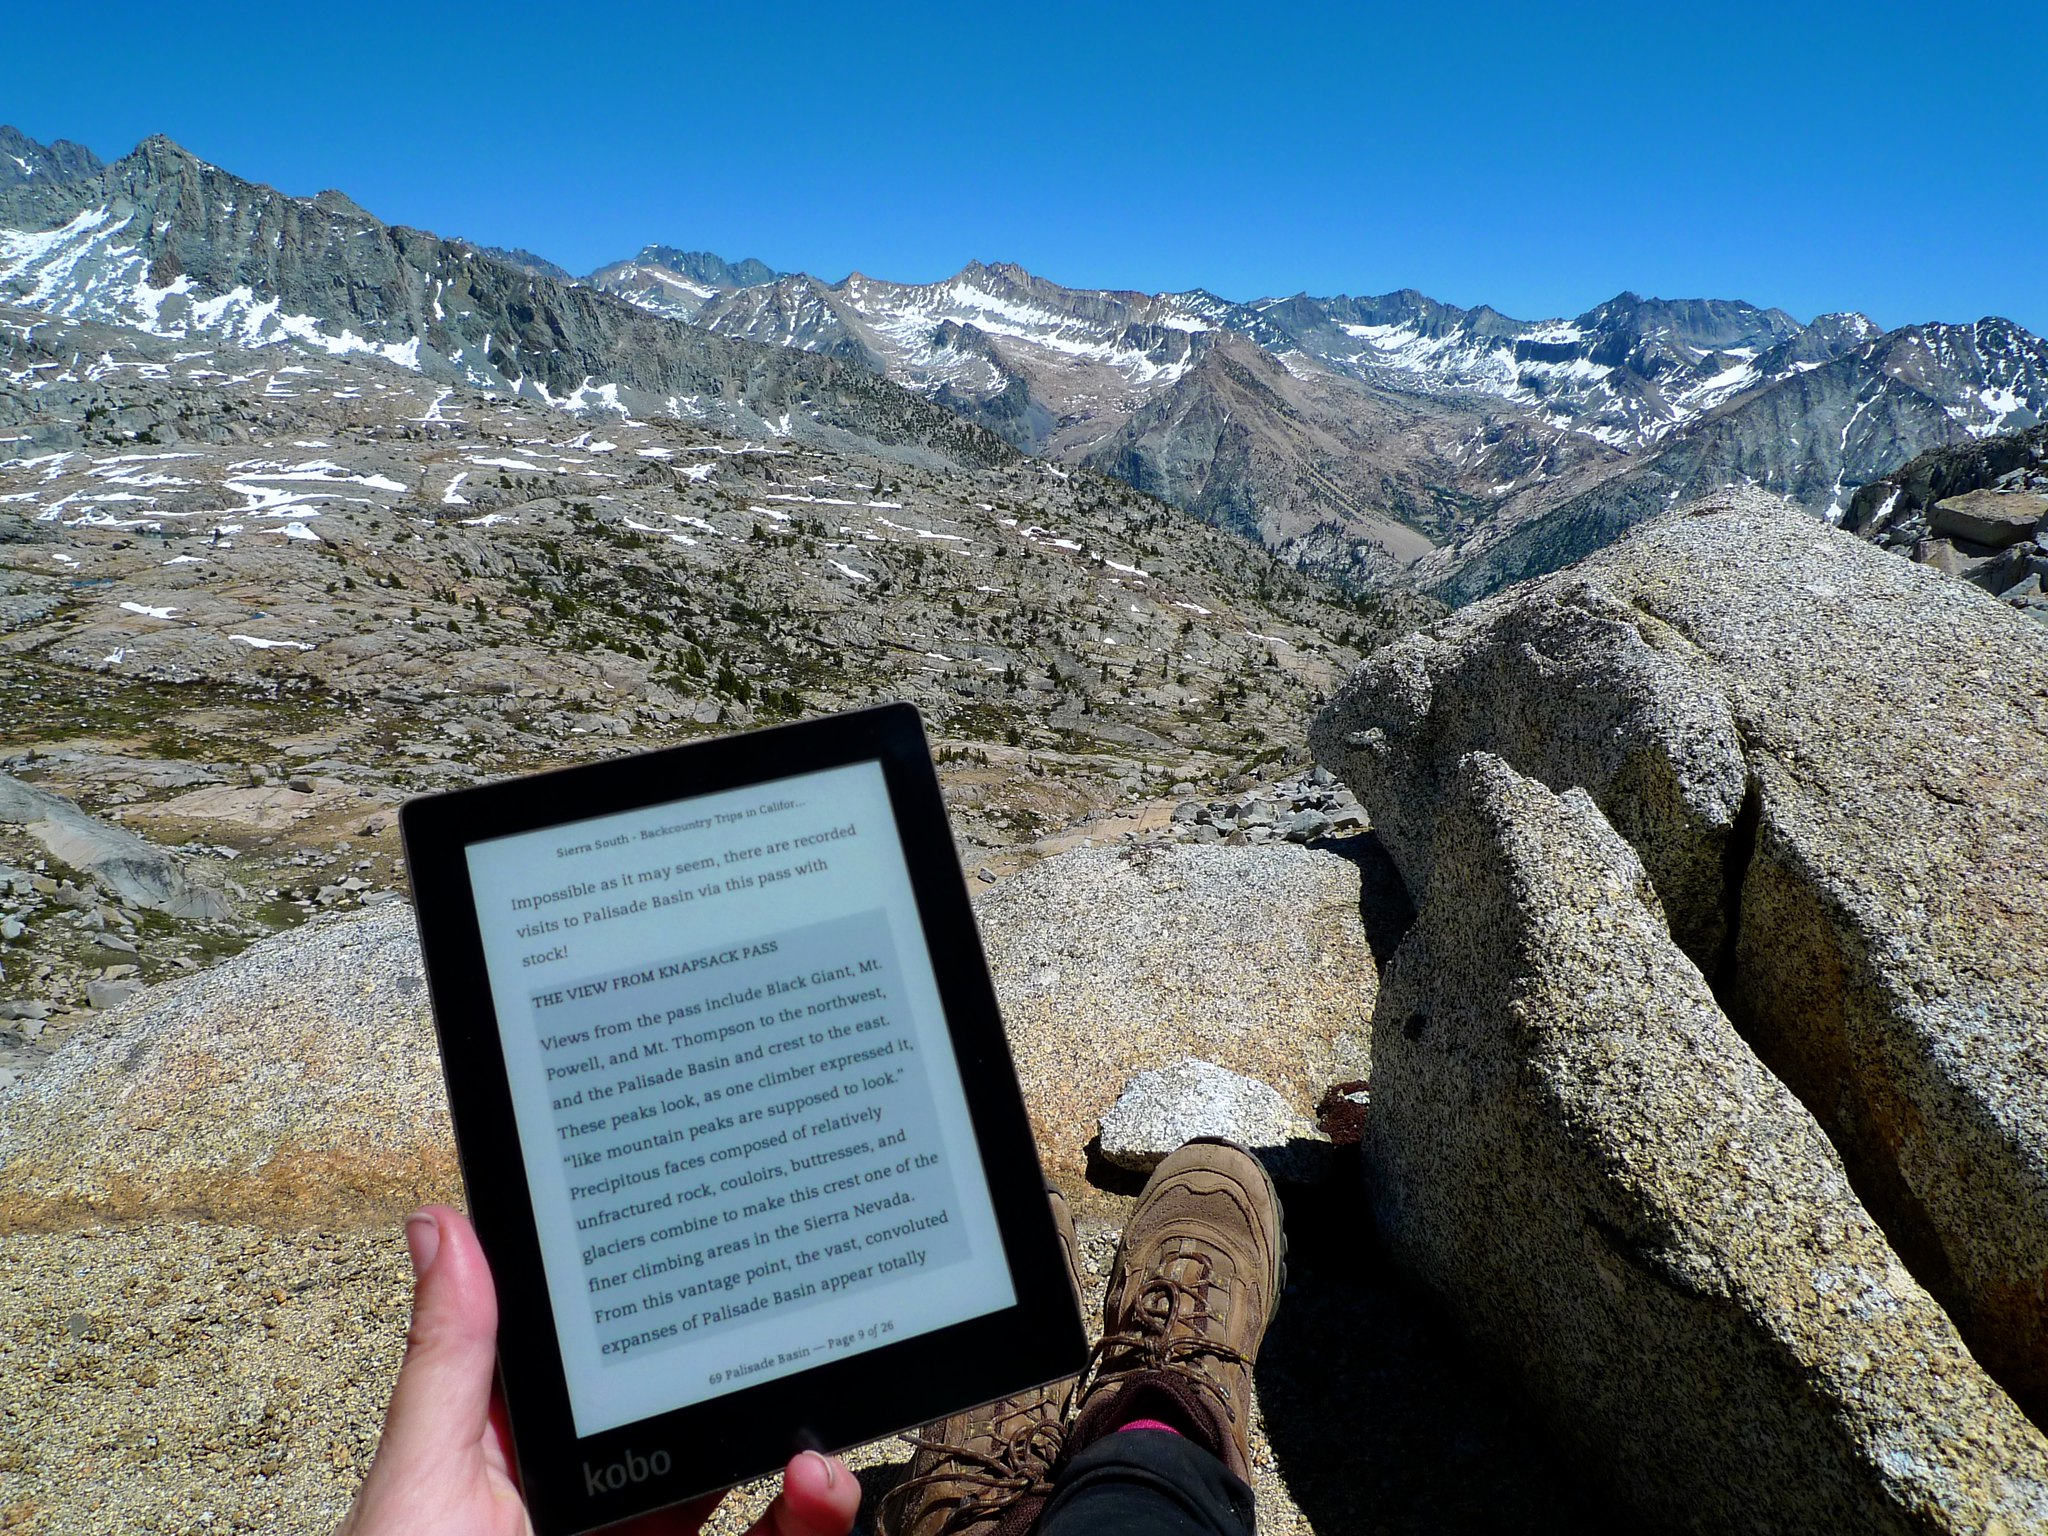 Reading about the view from Knapsack Pass while looking at the view from Knapsack Pass